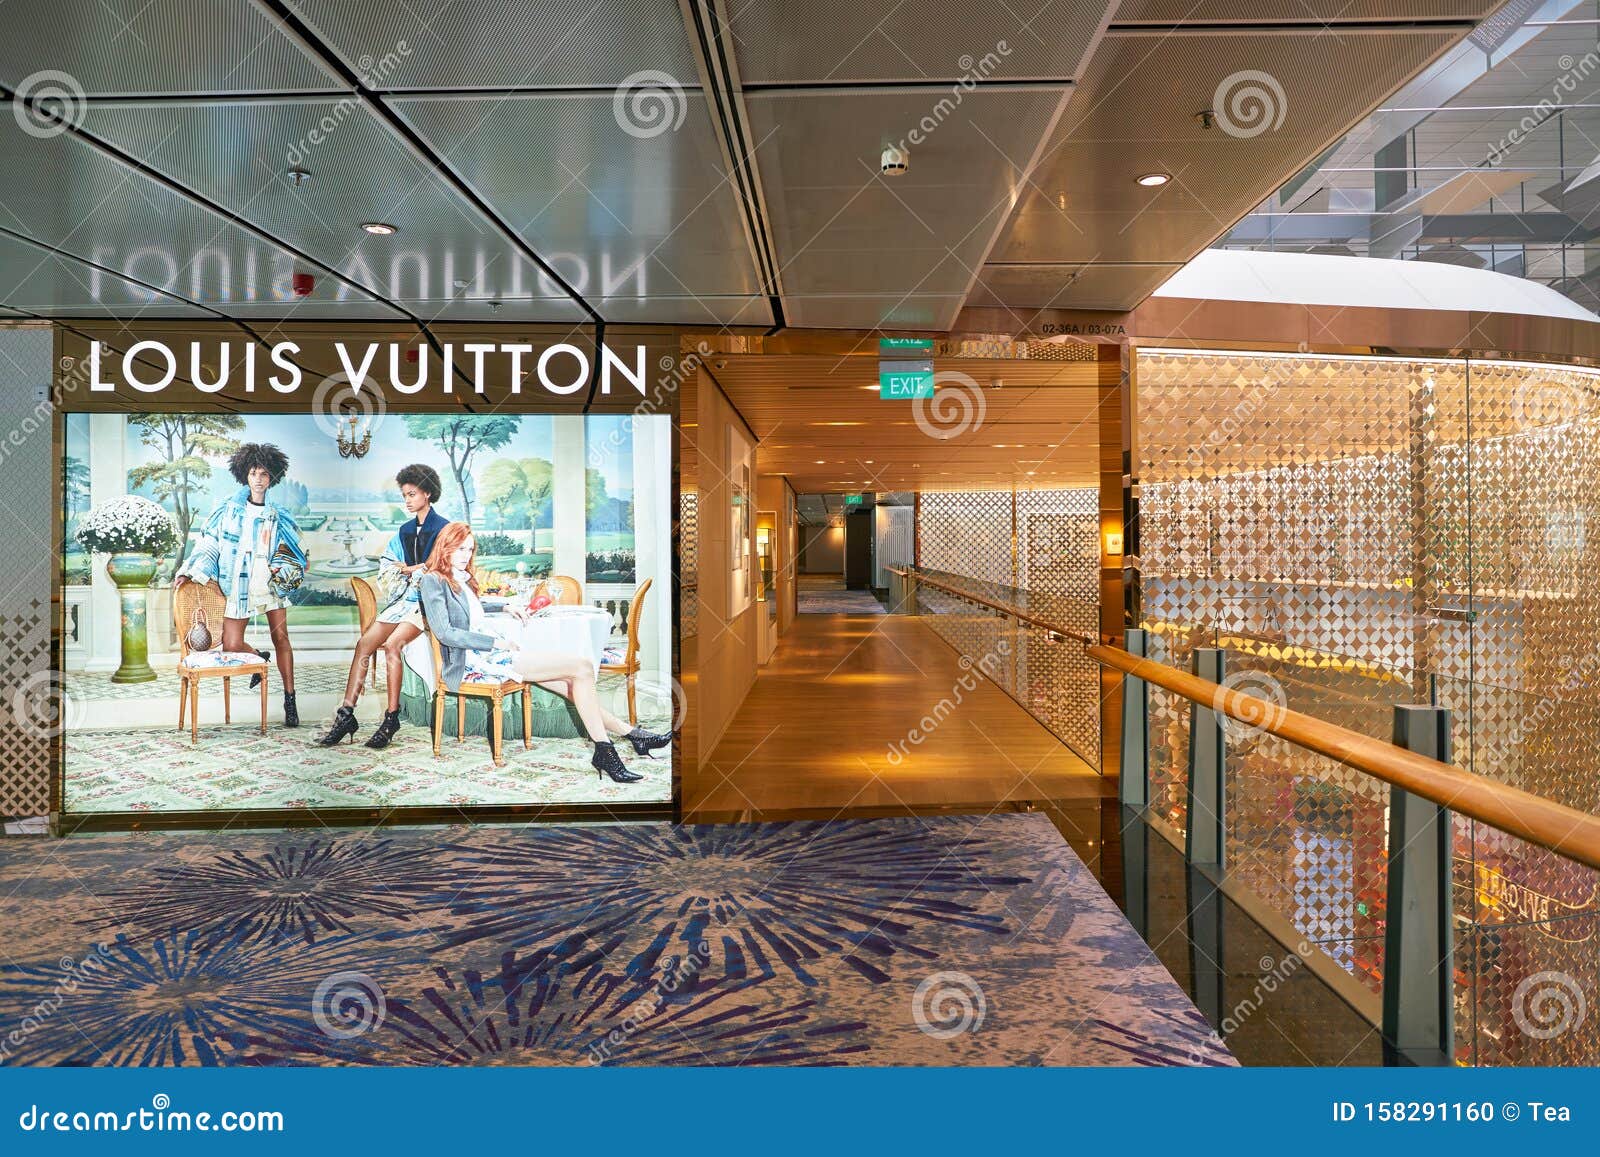 Changi reveals its revamped T3 Piazza and LV duplex store